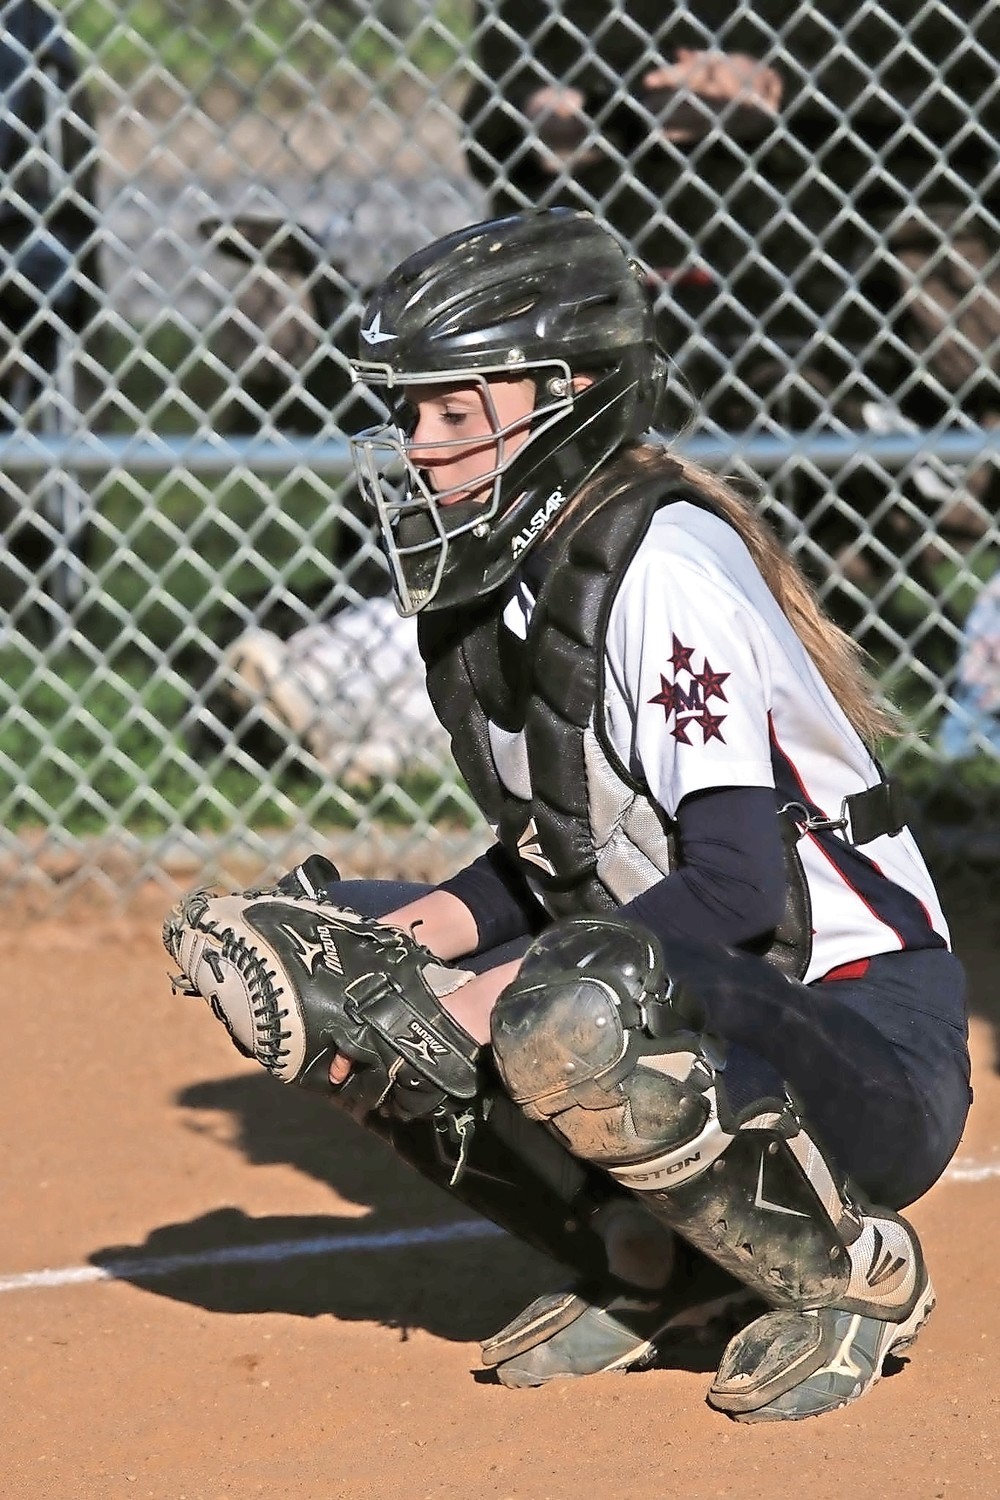 Ashley Budrewicz, Jessica’s twin and battery-mate, behind the plate.